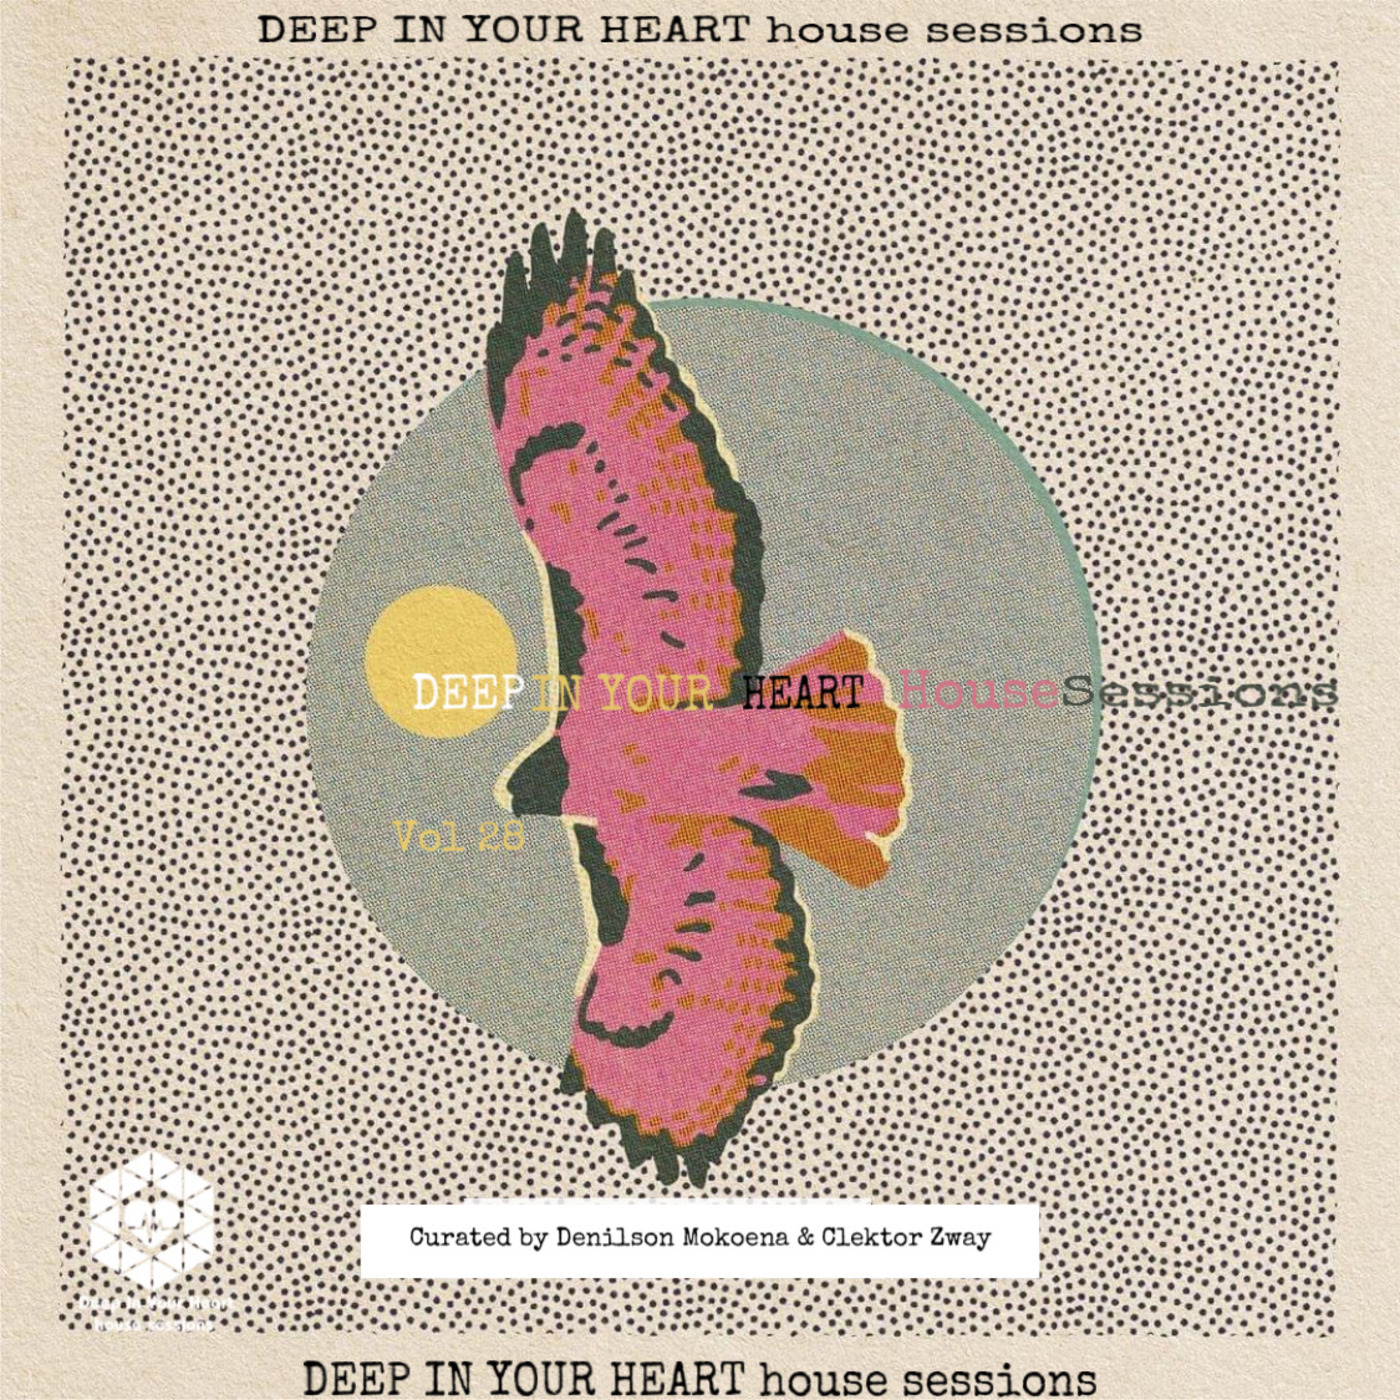 DEEP IN YOUR HEART house sessions vol 28 mixed by Clektor Zway & Denilson Mokoena